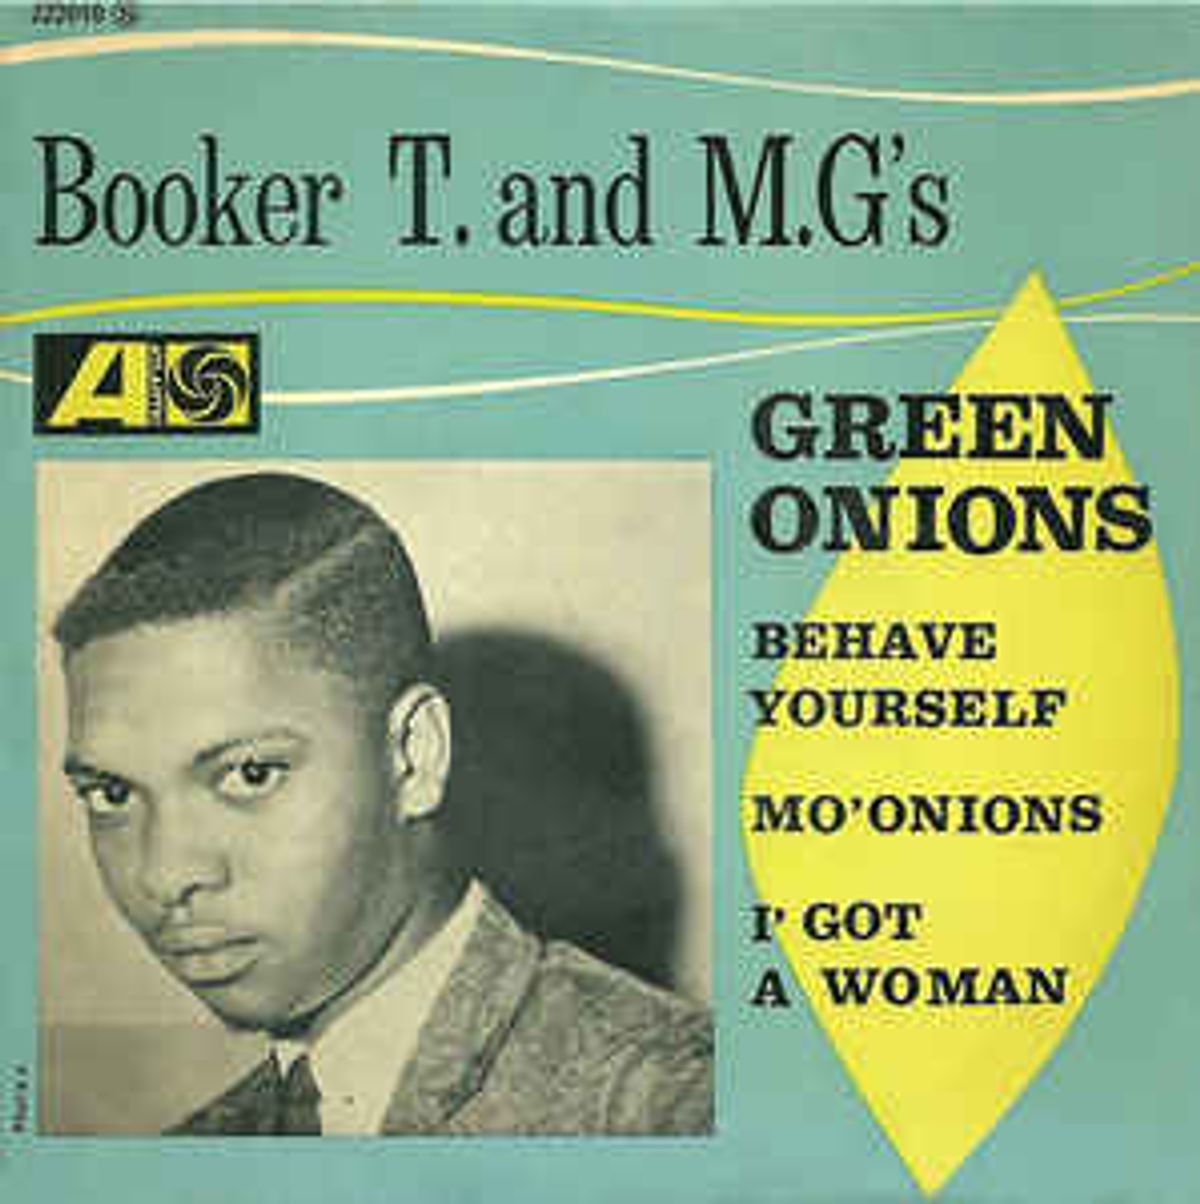 #Bkantopwaardering - Booker T. and The MGs - Green Onions (1962)